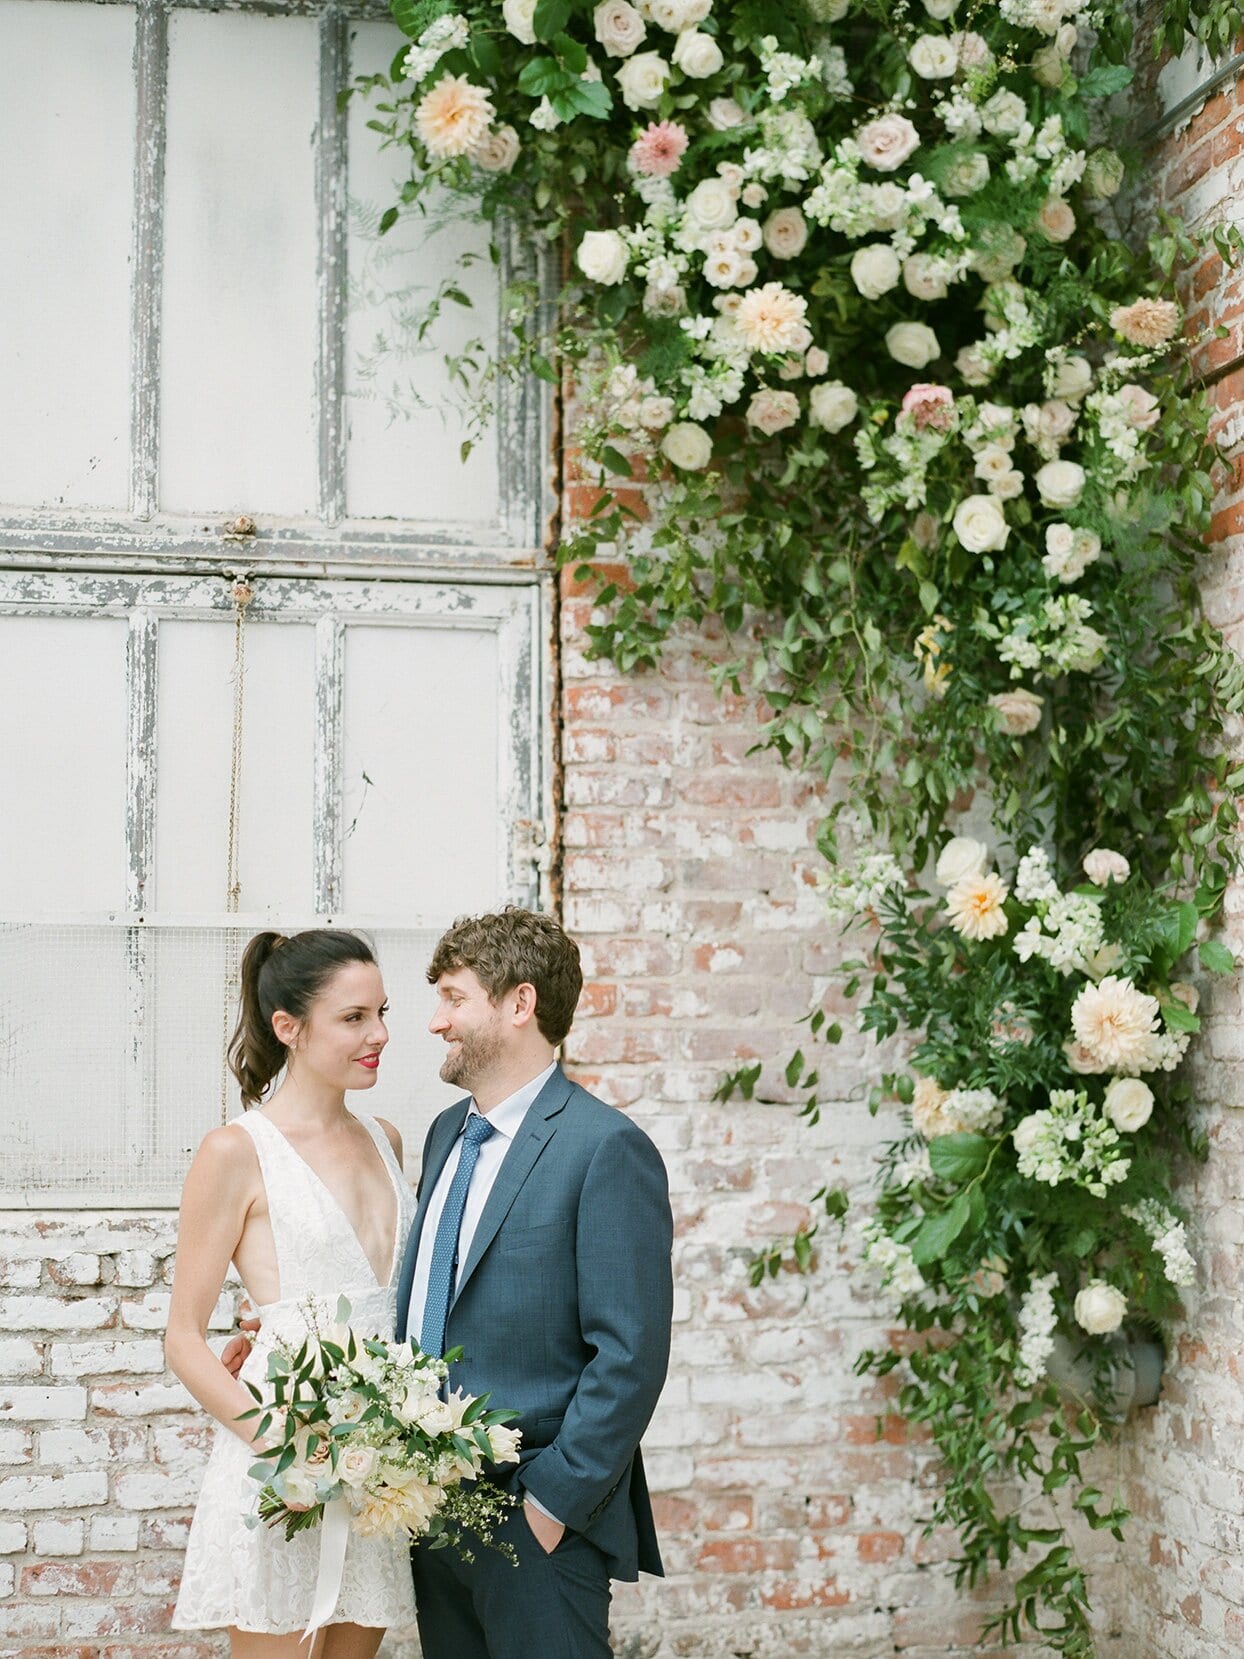 The Motto of This Intimate Industrial Warehouse Wedding? “Flowers Everywhere!”